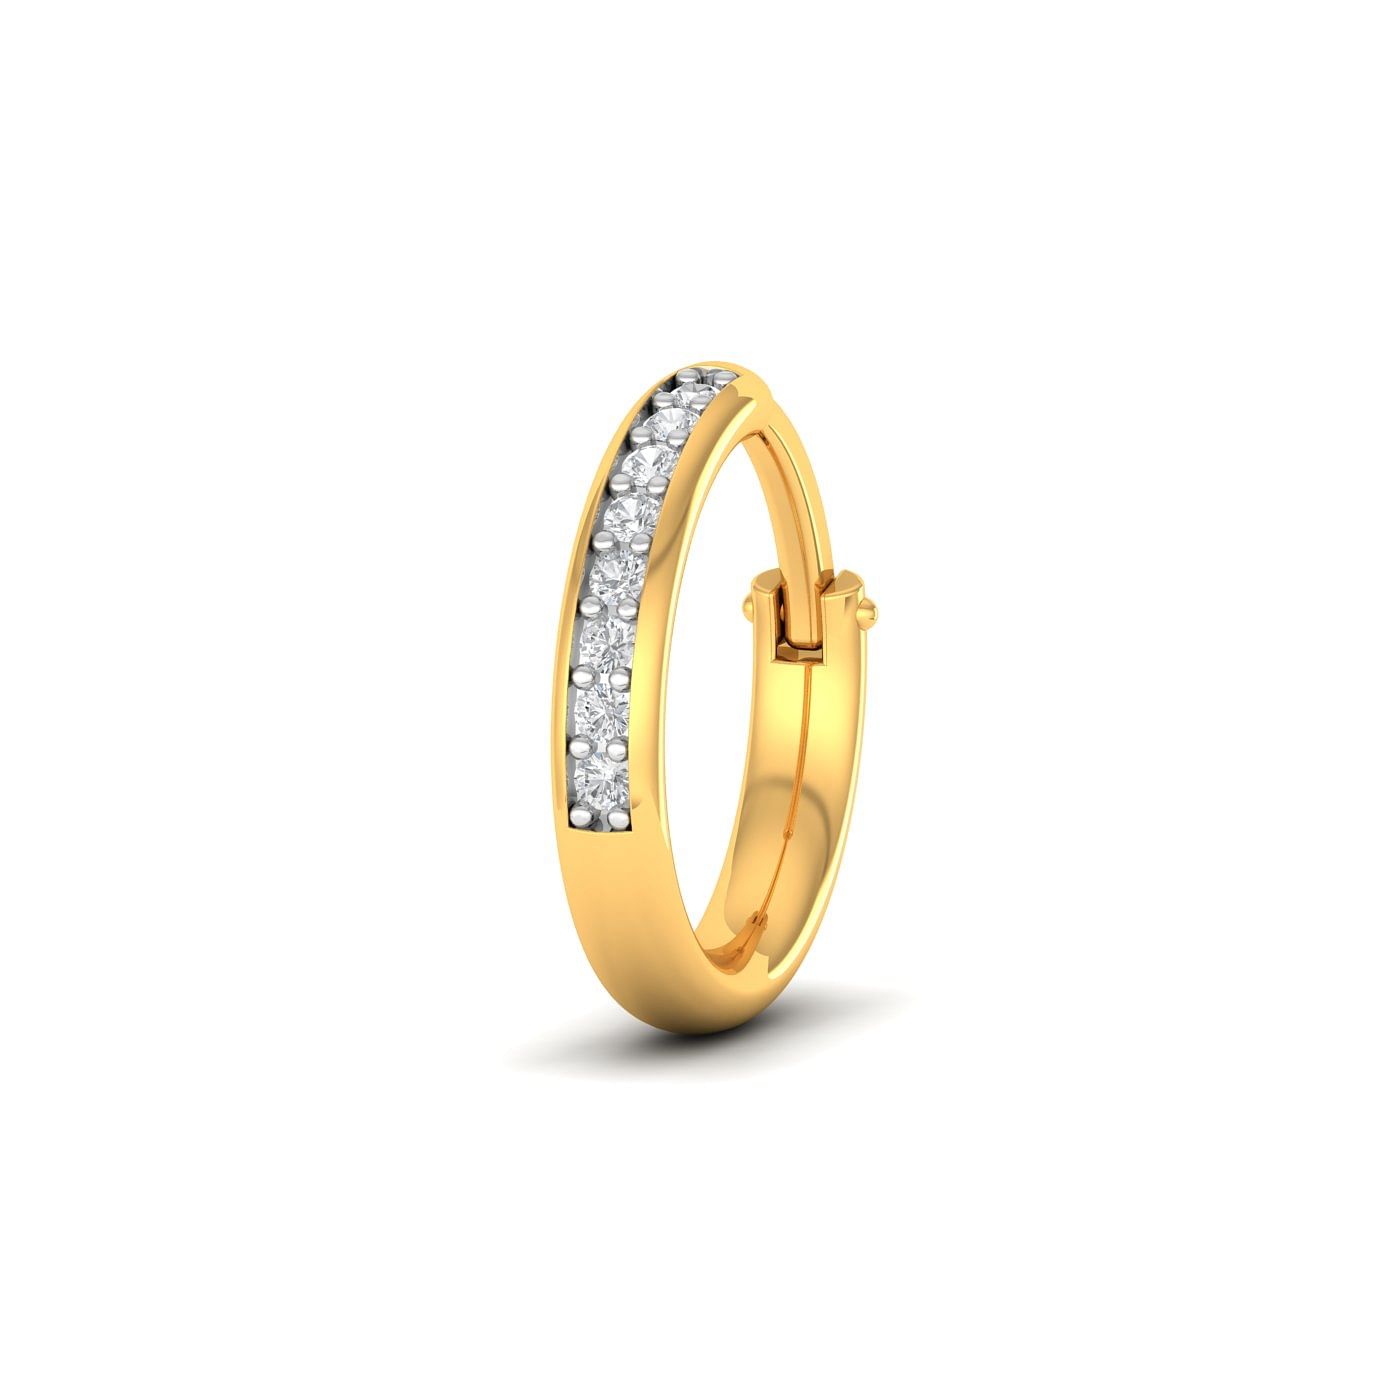 Bezel Setting Diamond Nose Ring With Yellow Gold